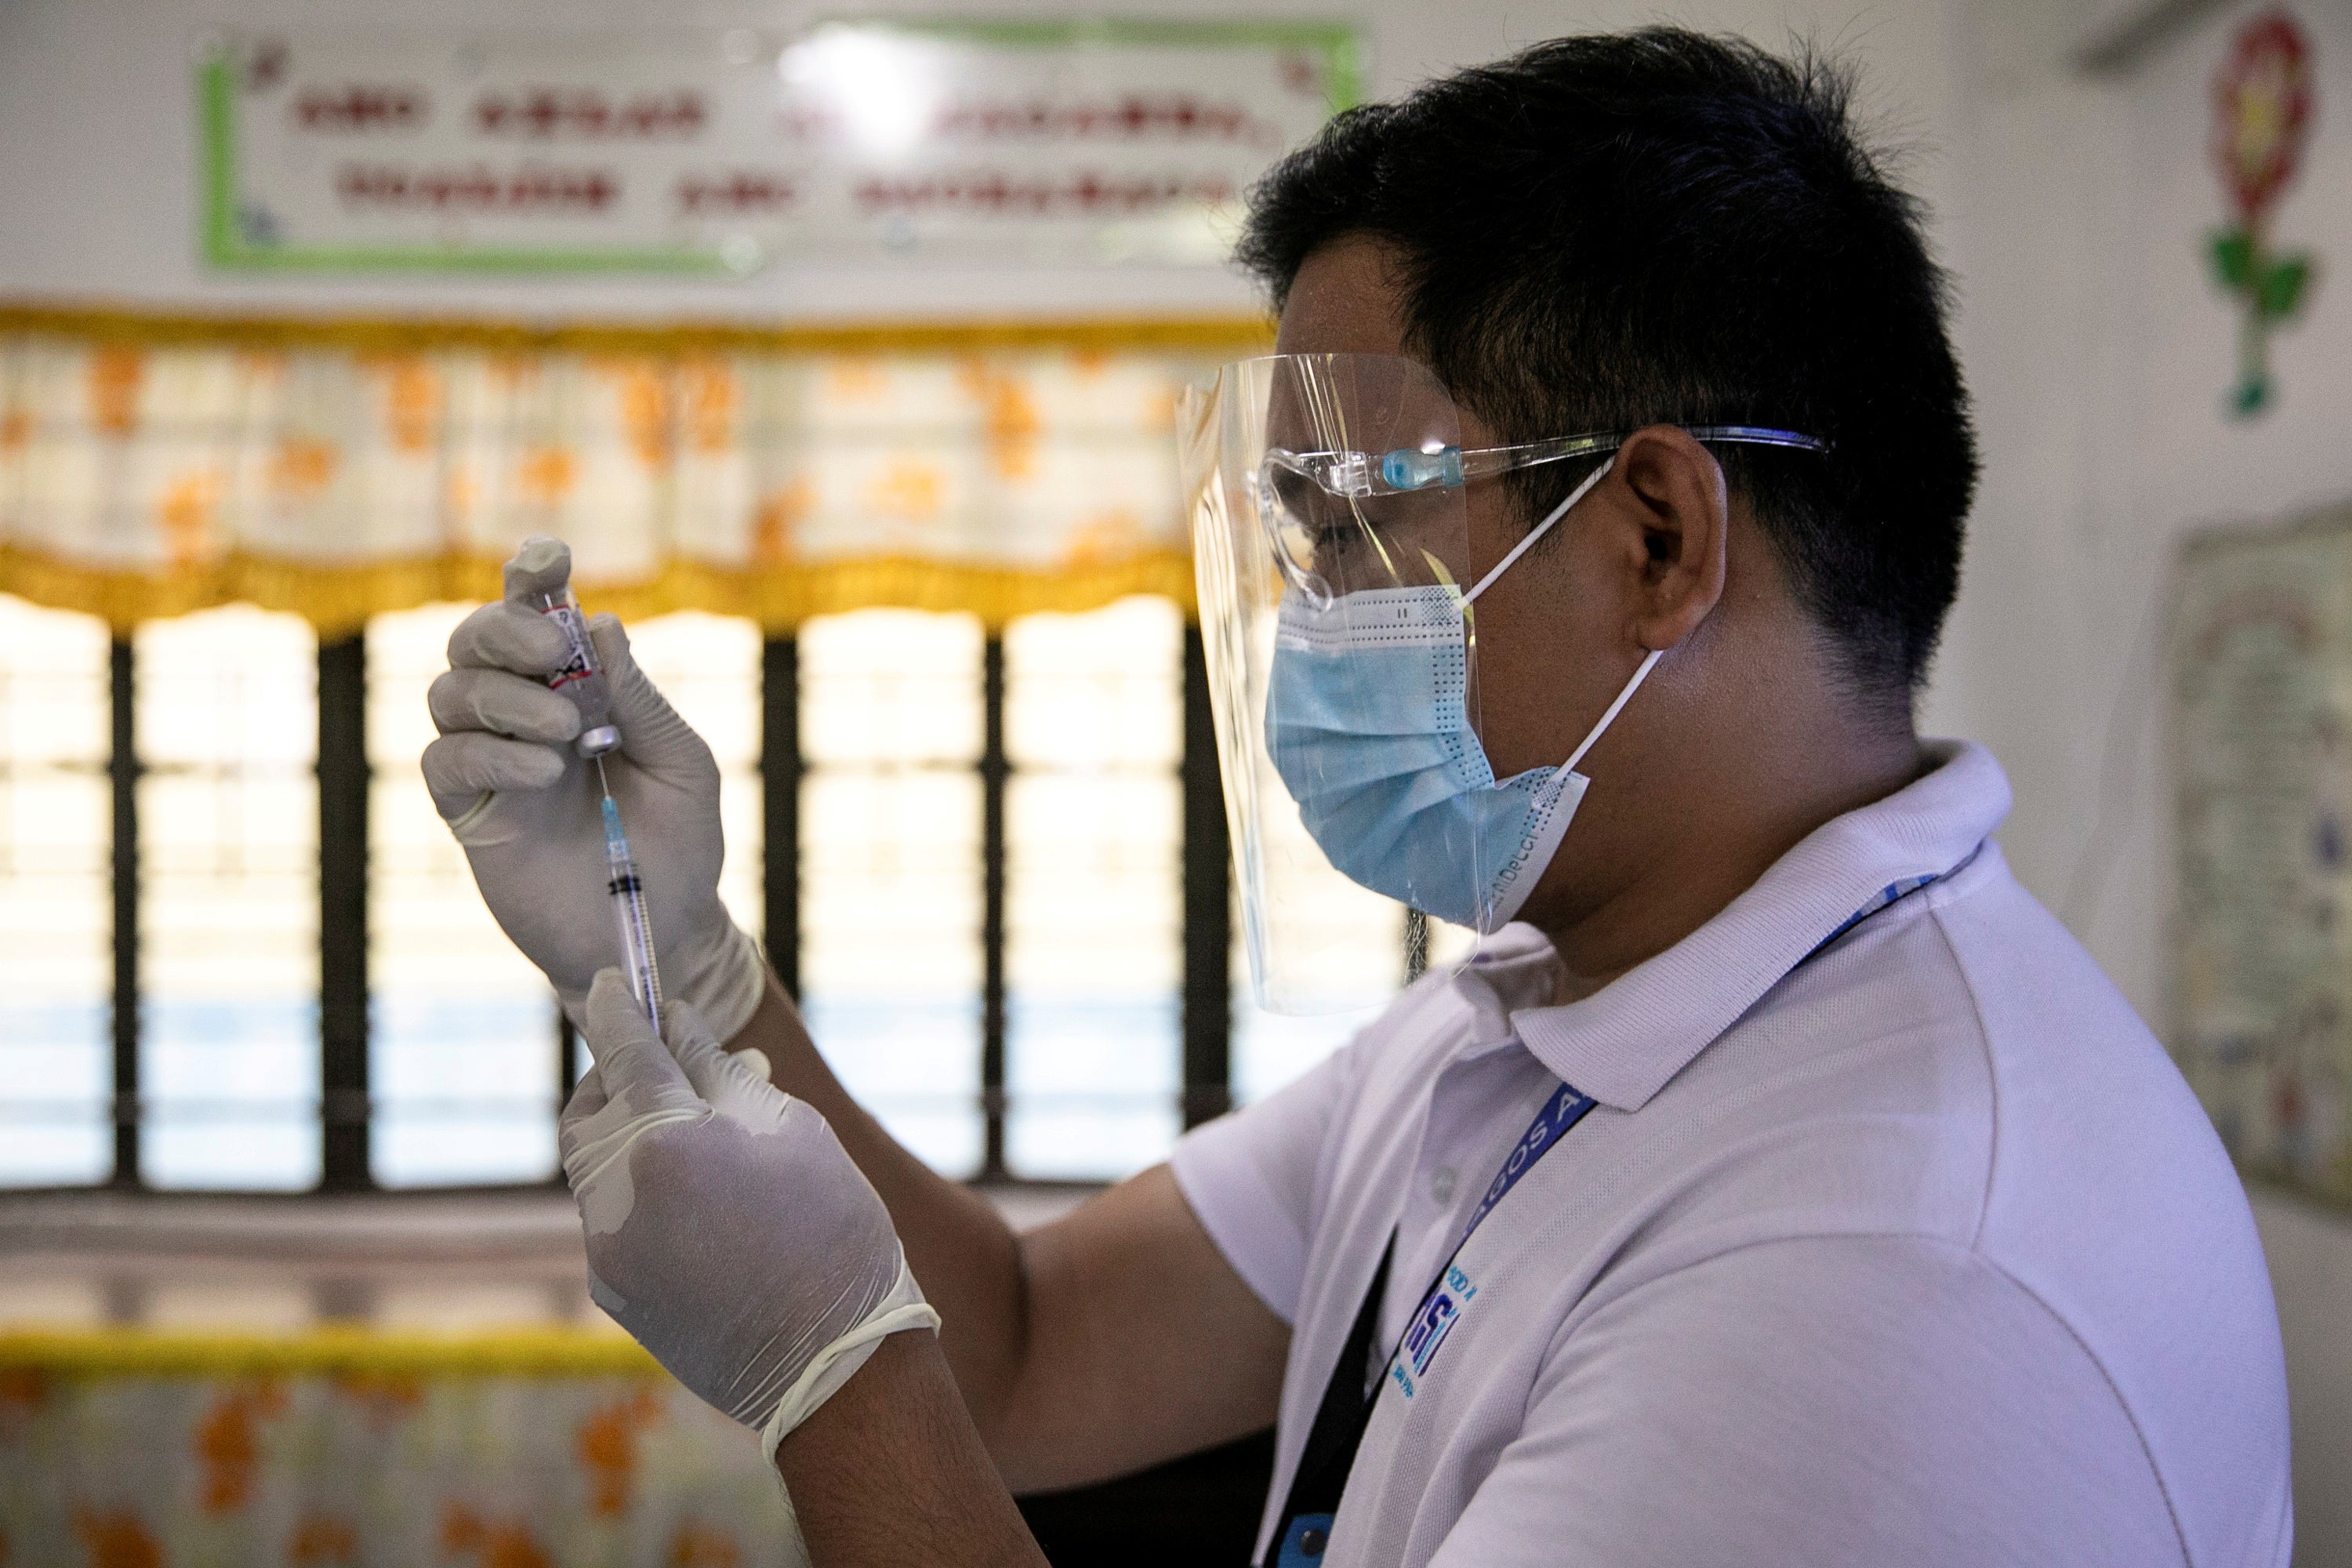 A health worker participates in a simulation for COVID-19 vaccination in preparation for its arrival, at an elementary school turned vaccination command center in Pasig City, Metro Manila, Philippines